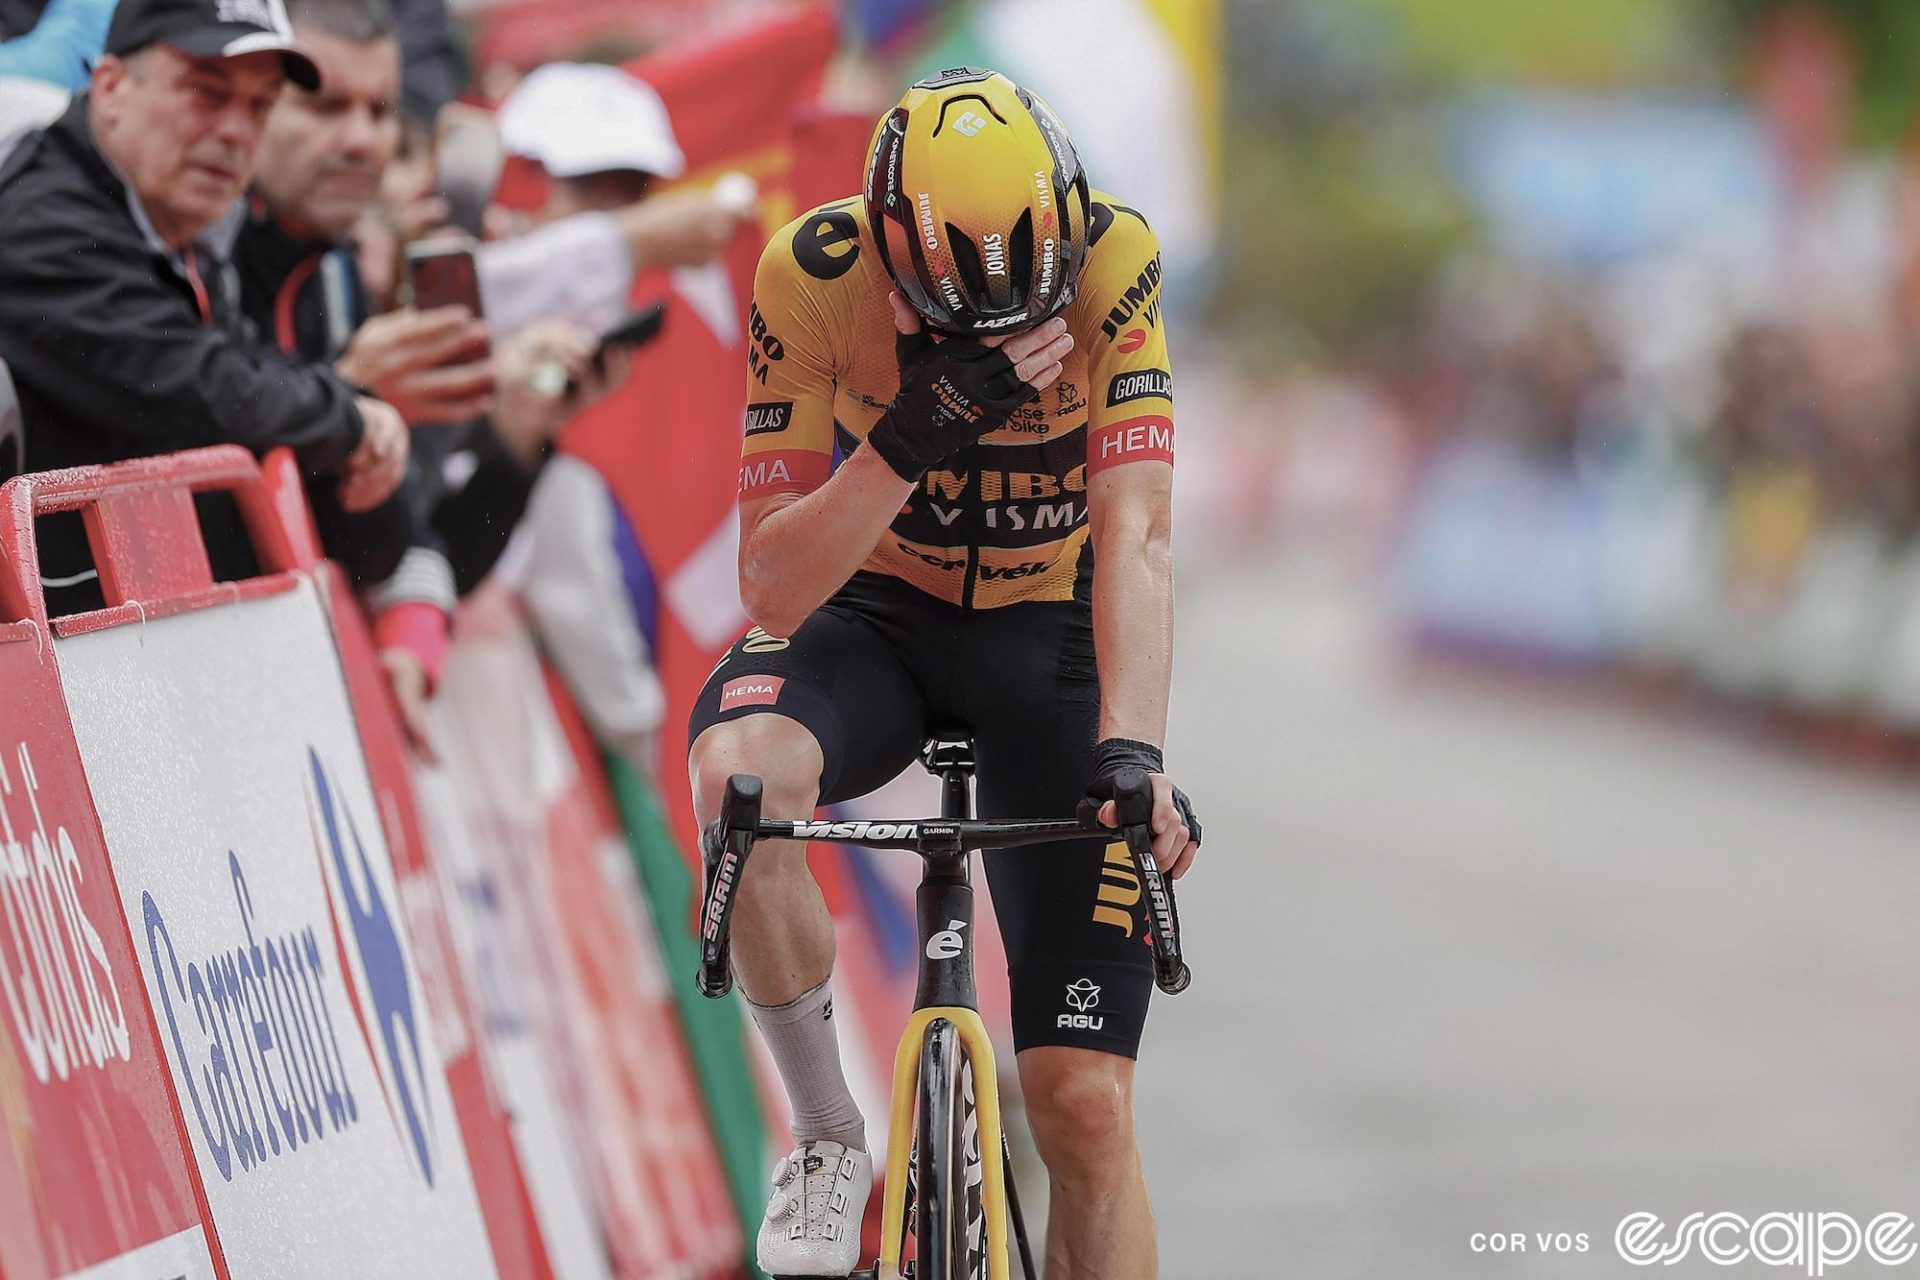 Jonas Vingegaard wins stage 16 of the 2023 Vuelta a España. He crosses the line alone, hand over his eyes, likely thinking about friend and teammate Nathan van Hooydonck, in the hospital after a car crash that morning.